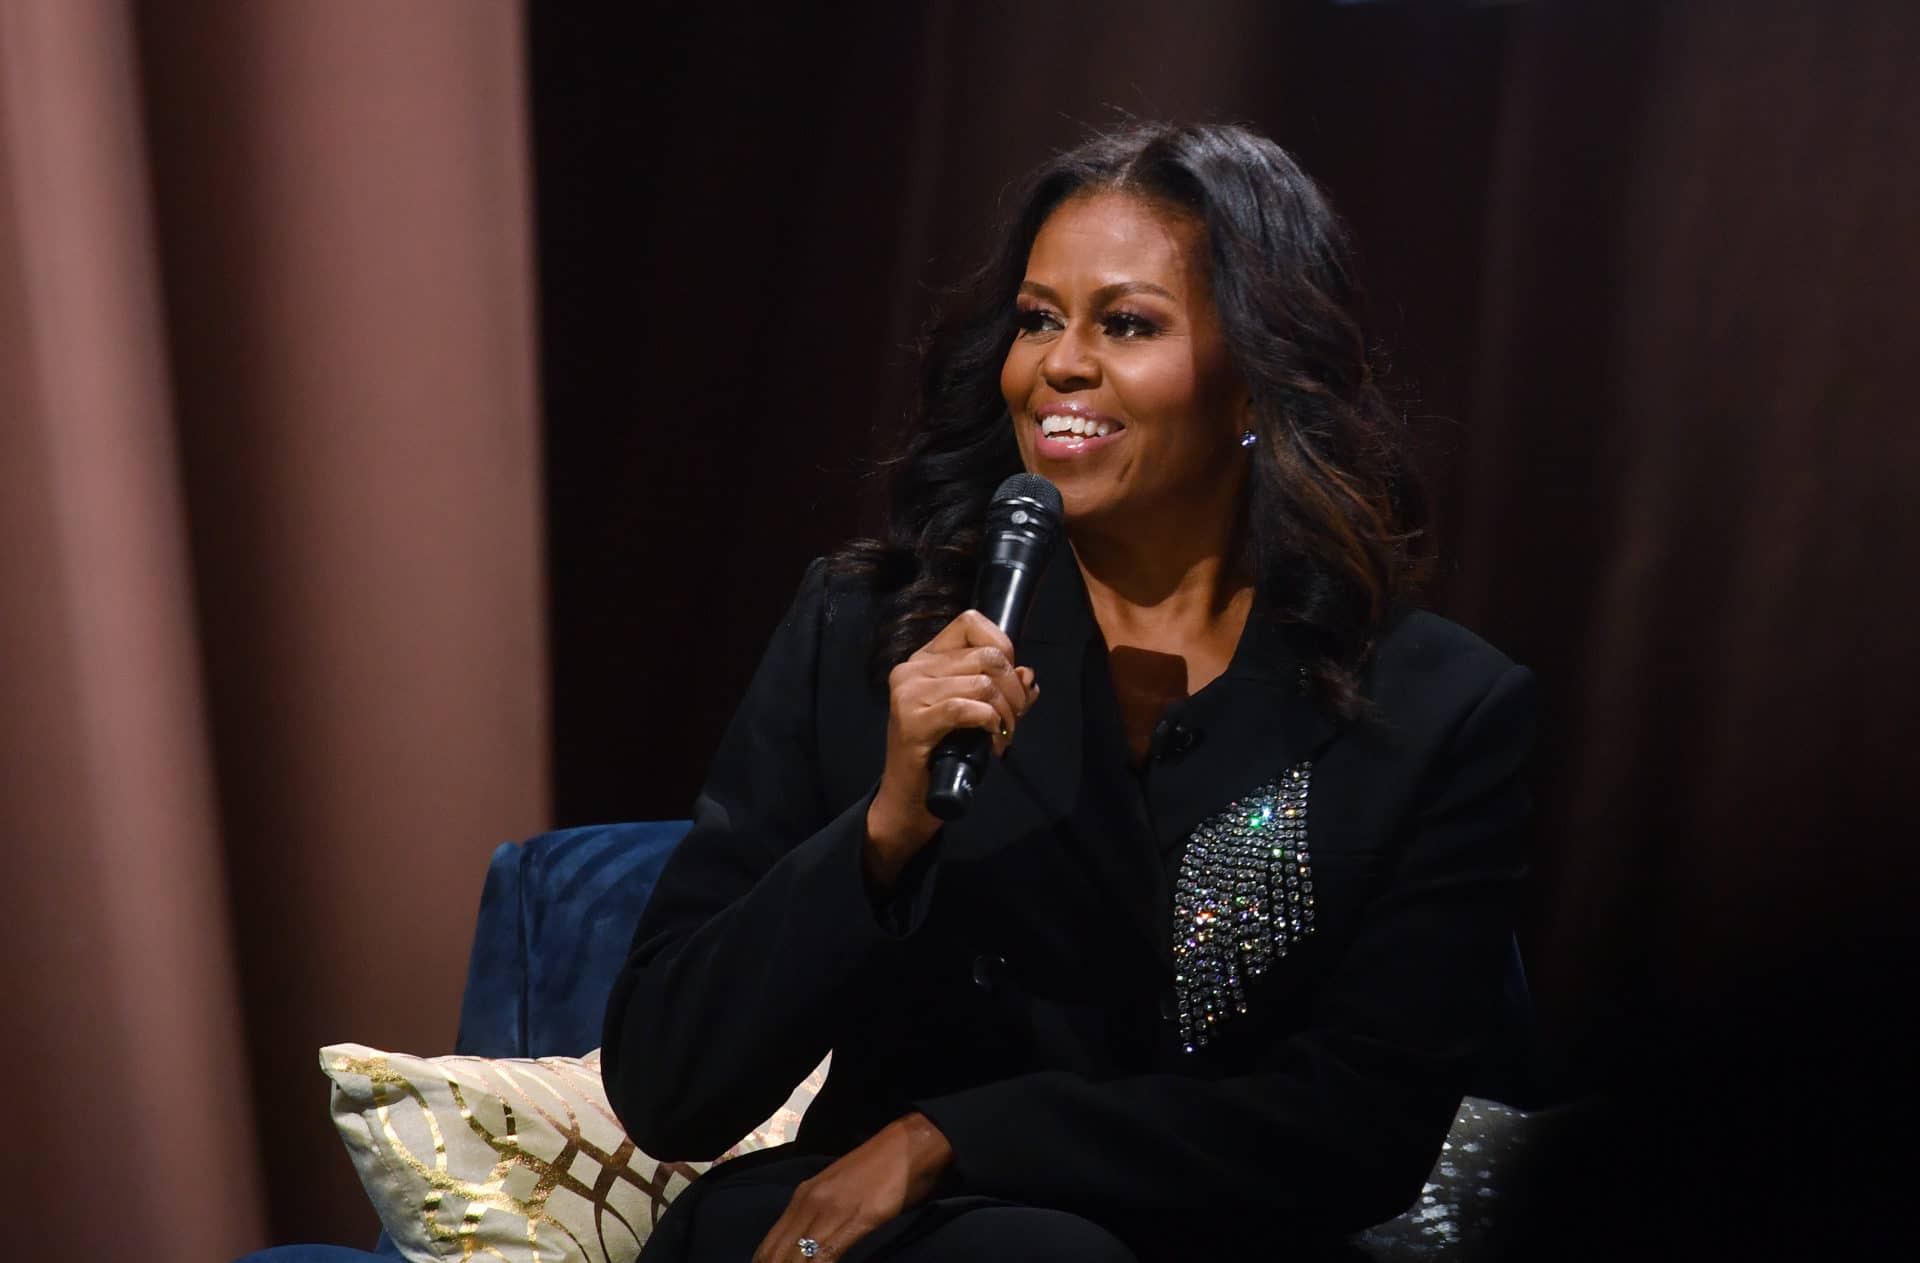 Michelle Obama's High School Will Name Athletic Center After Her